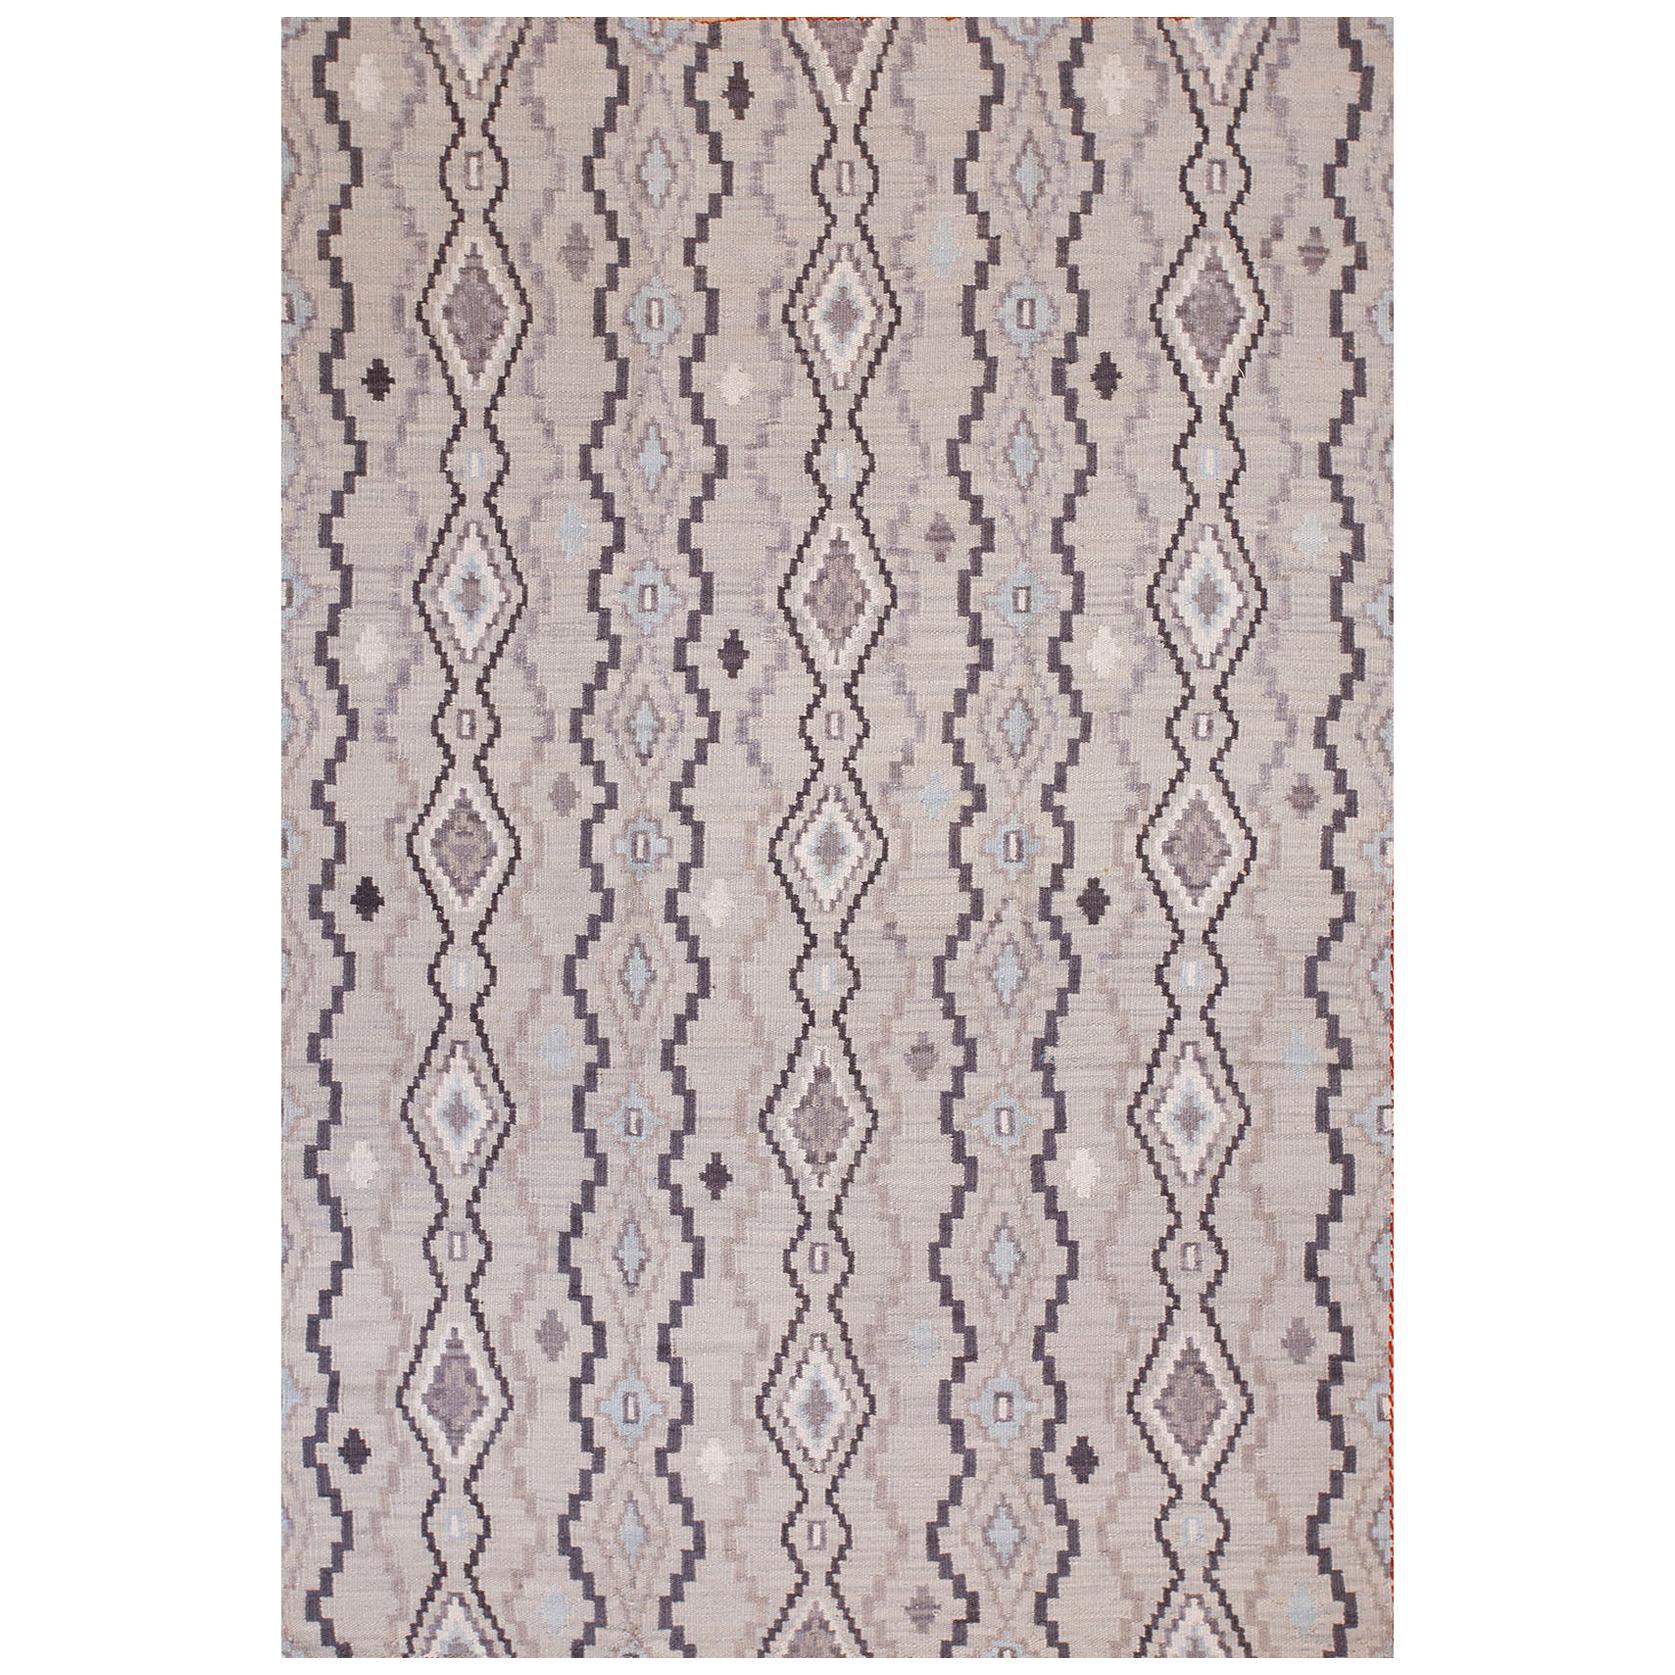 Contemporary Handwoven Navajo Style Flat Weave Carpet (6' x 9' - 183 x 274 cm) For Sale